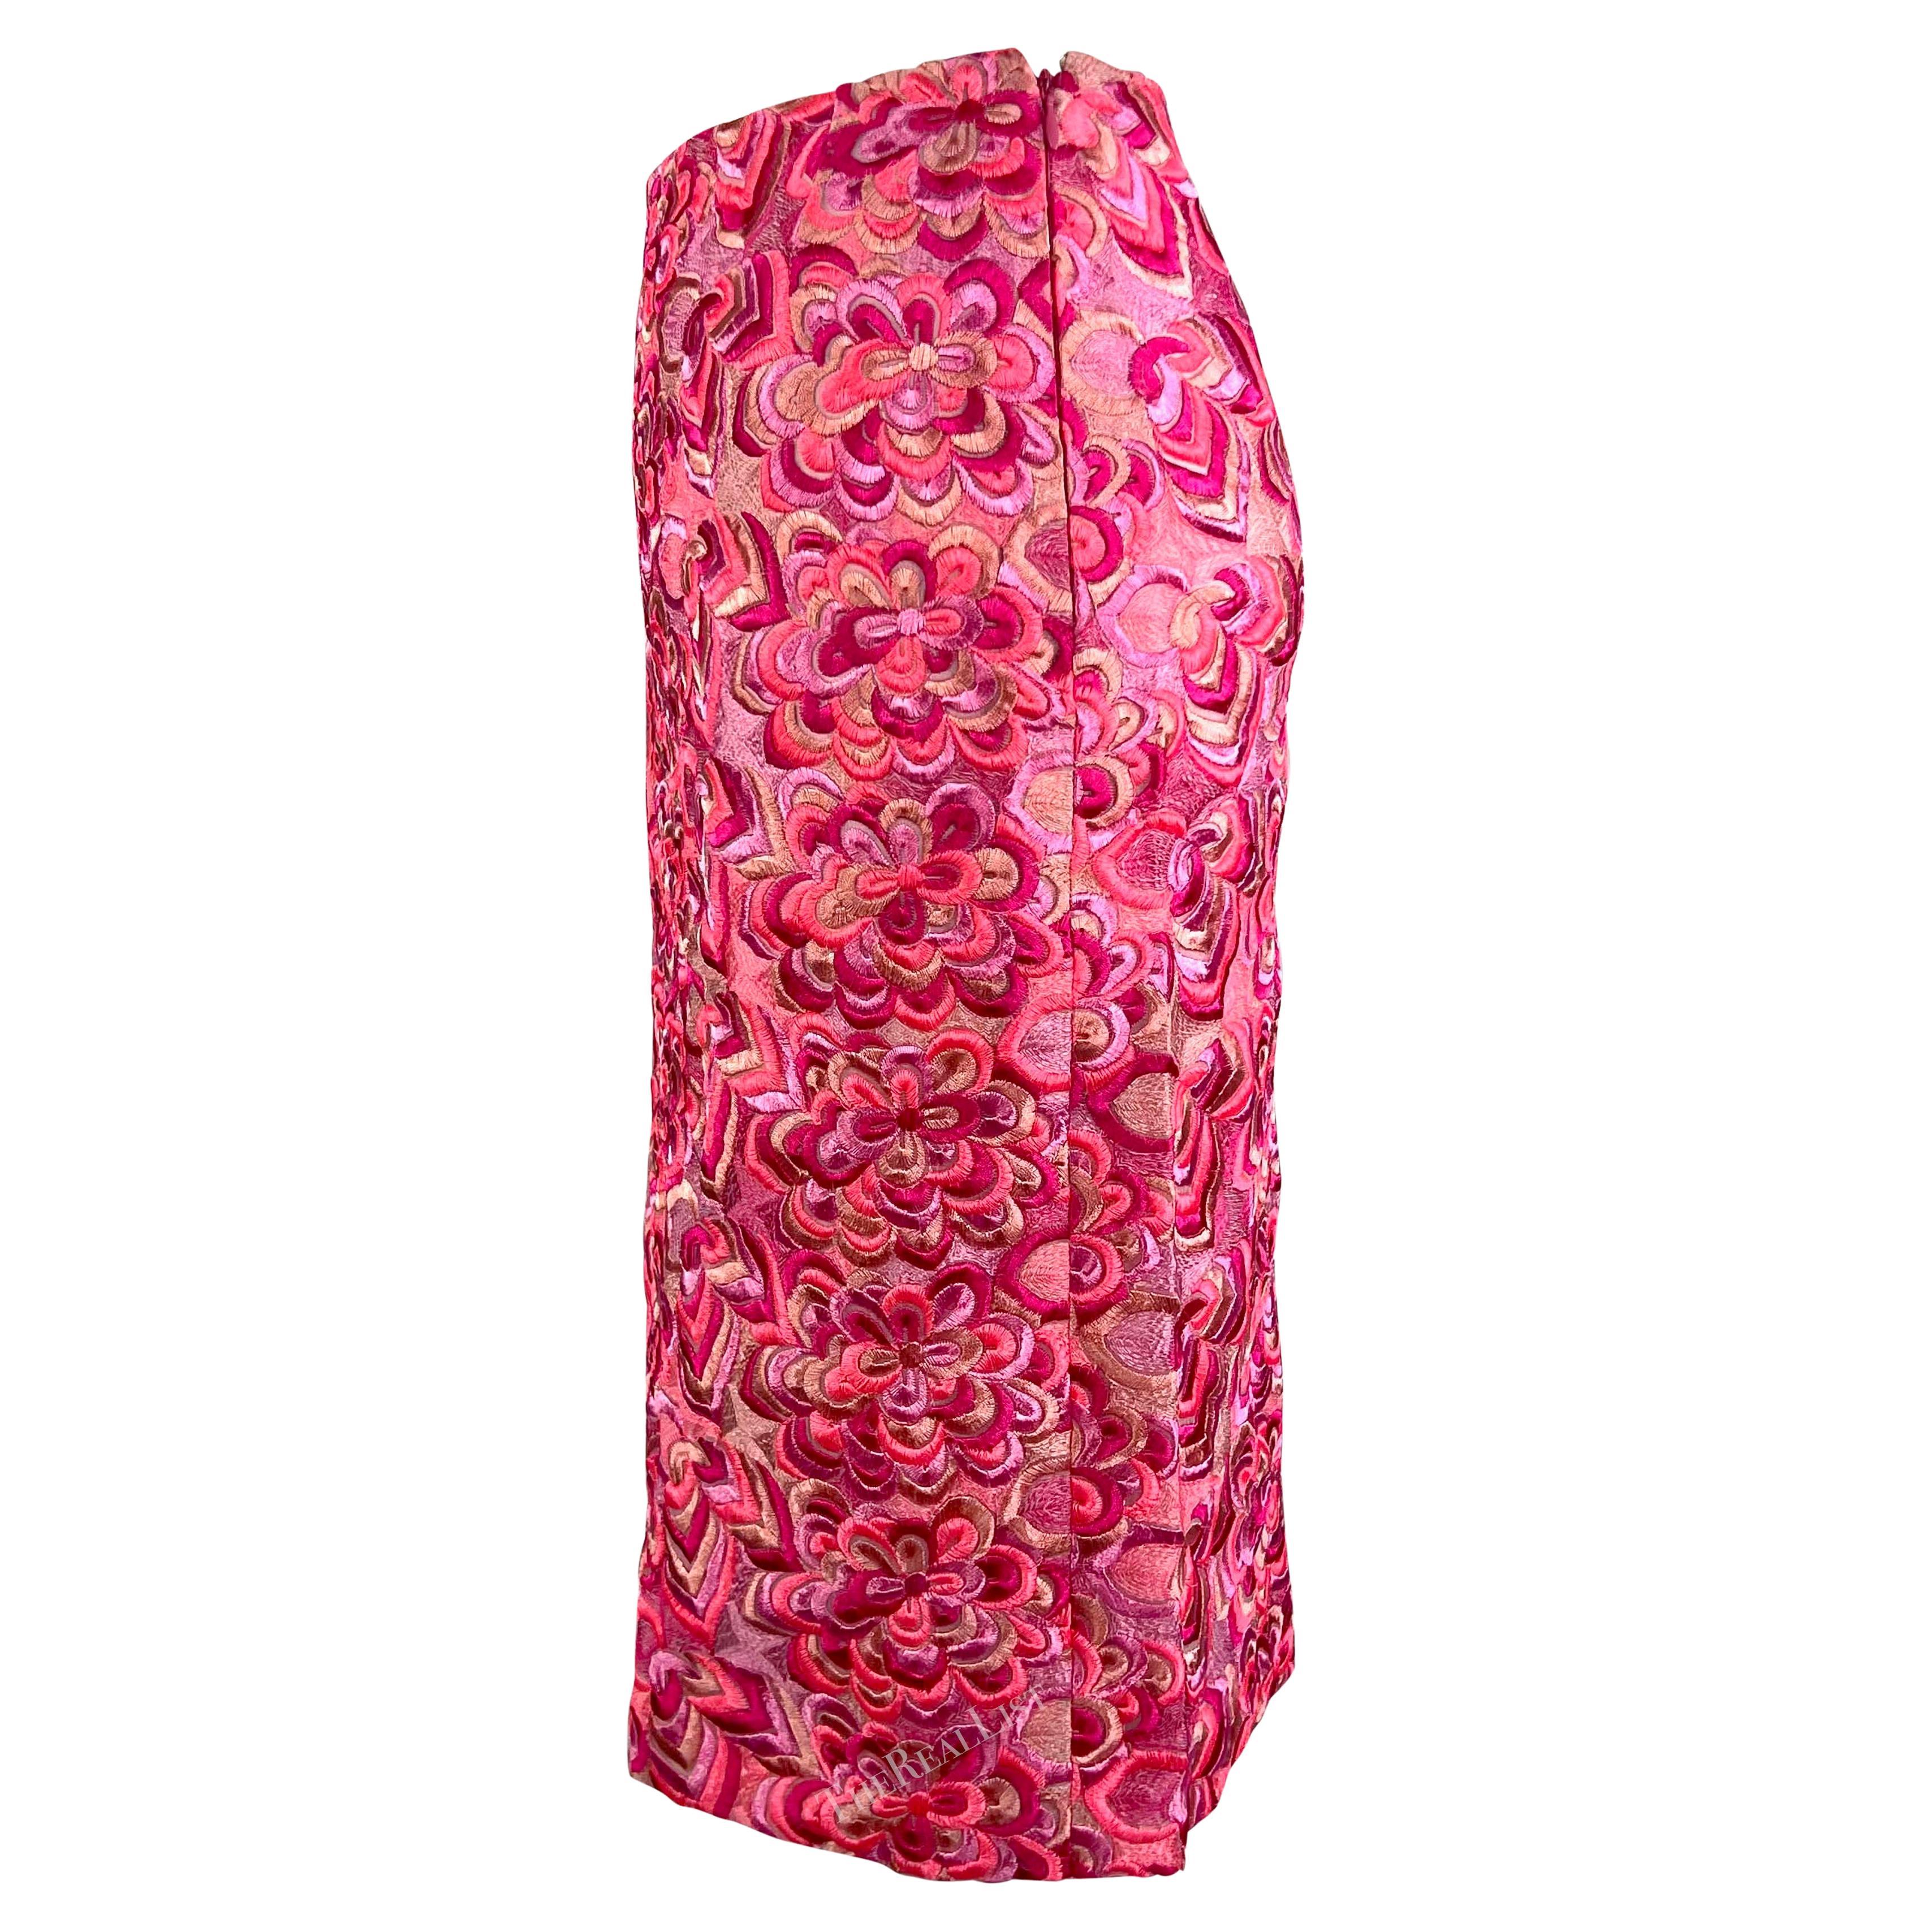 Women's S/S 2000 Gianni Versace by Donatella Neon Pink Floral Embroidered Skirt For Sale